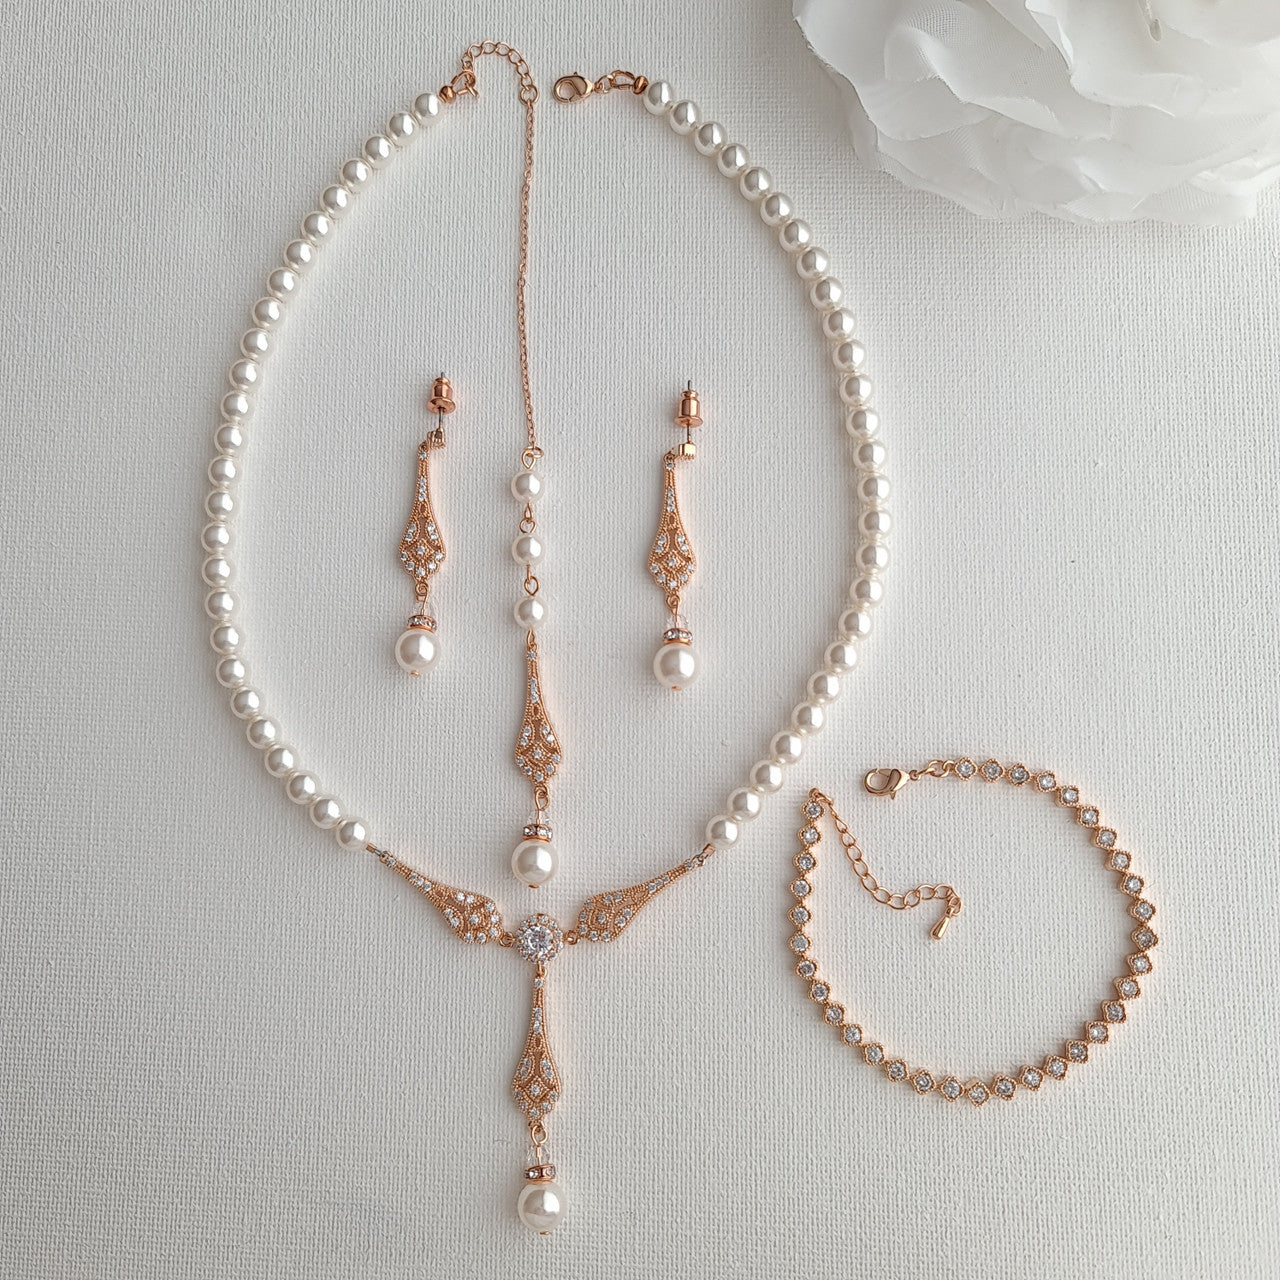 One Pearl Necklace. Three Generations. The Perfect Bridal Accessory.